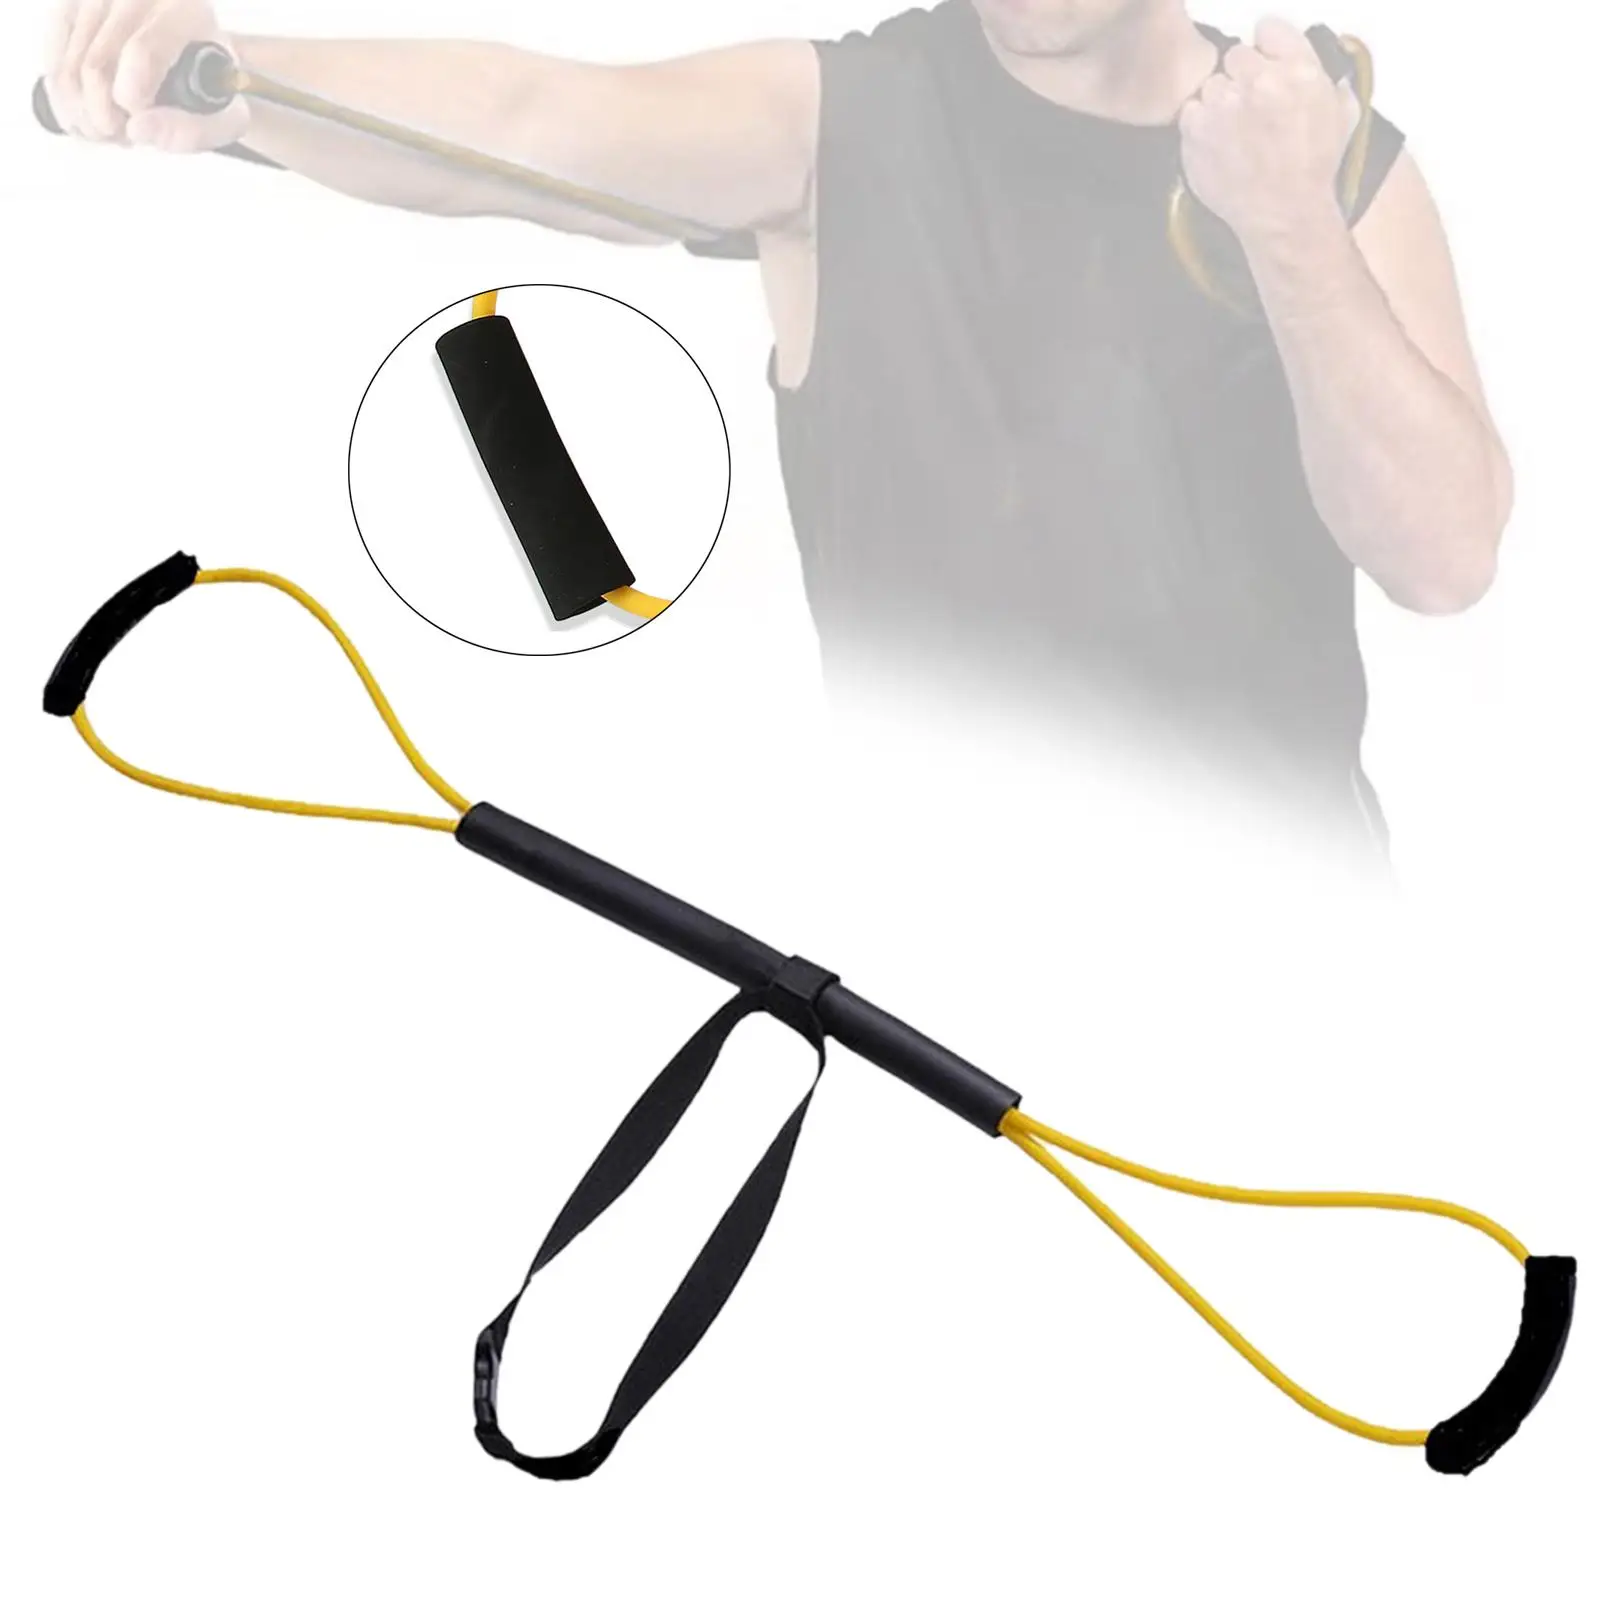 Boxing Resistance Bands Exercise Bands for Home Gym Exercise Equipment Boxing Training Portable Punching Equipment with Handles